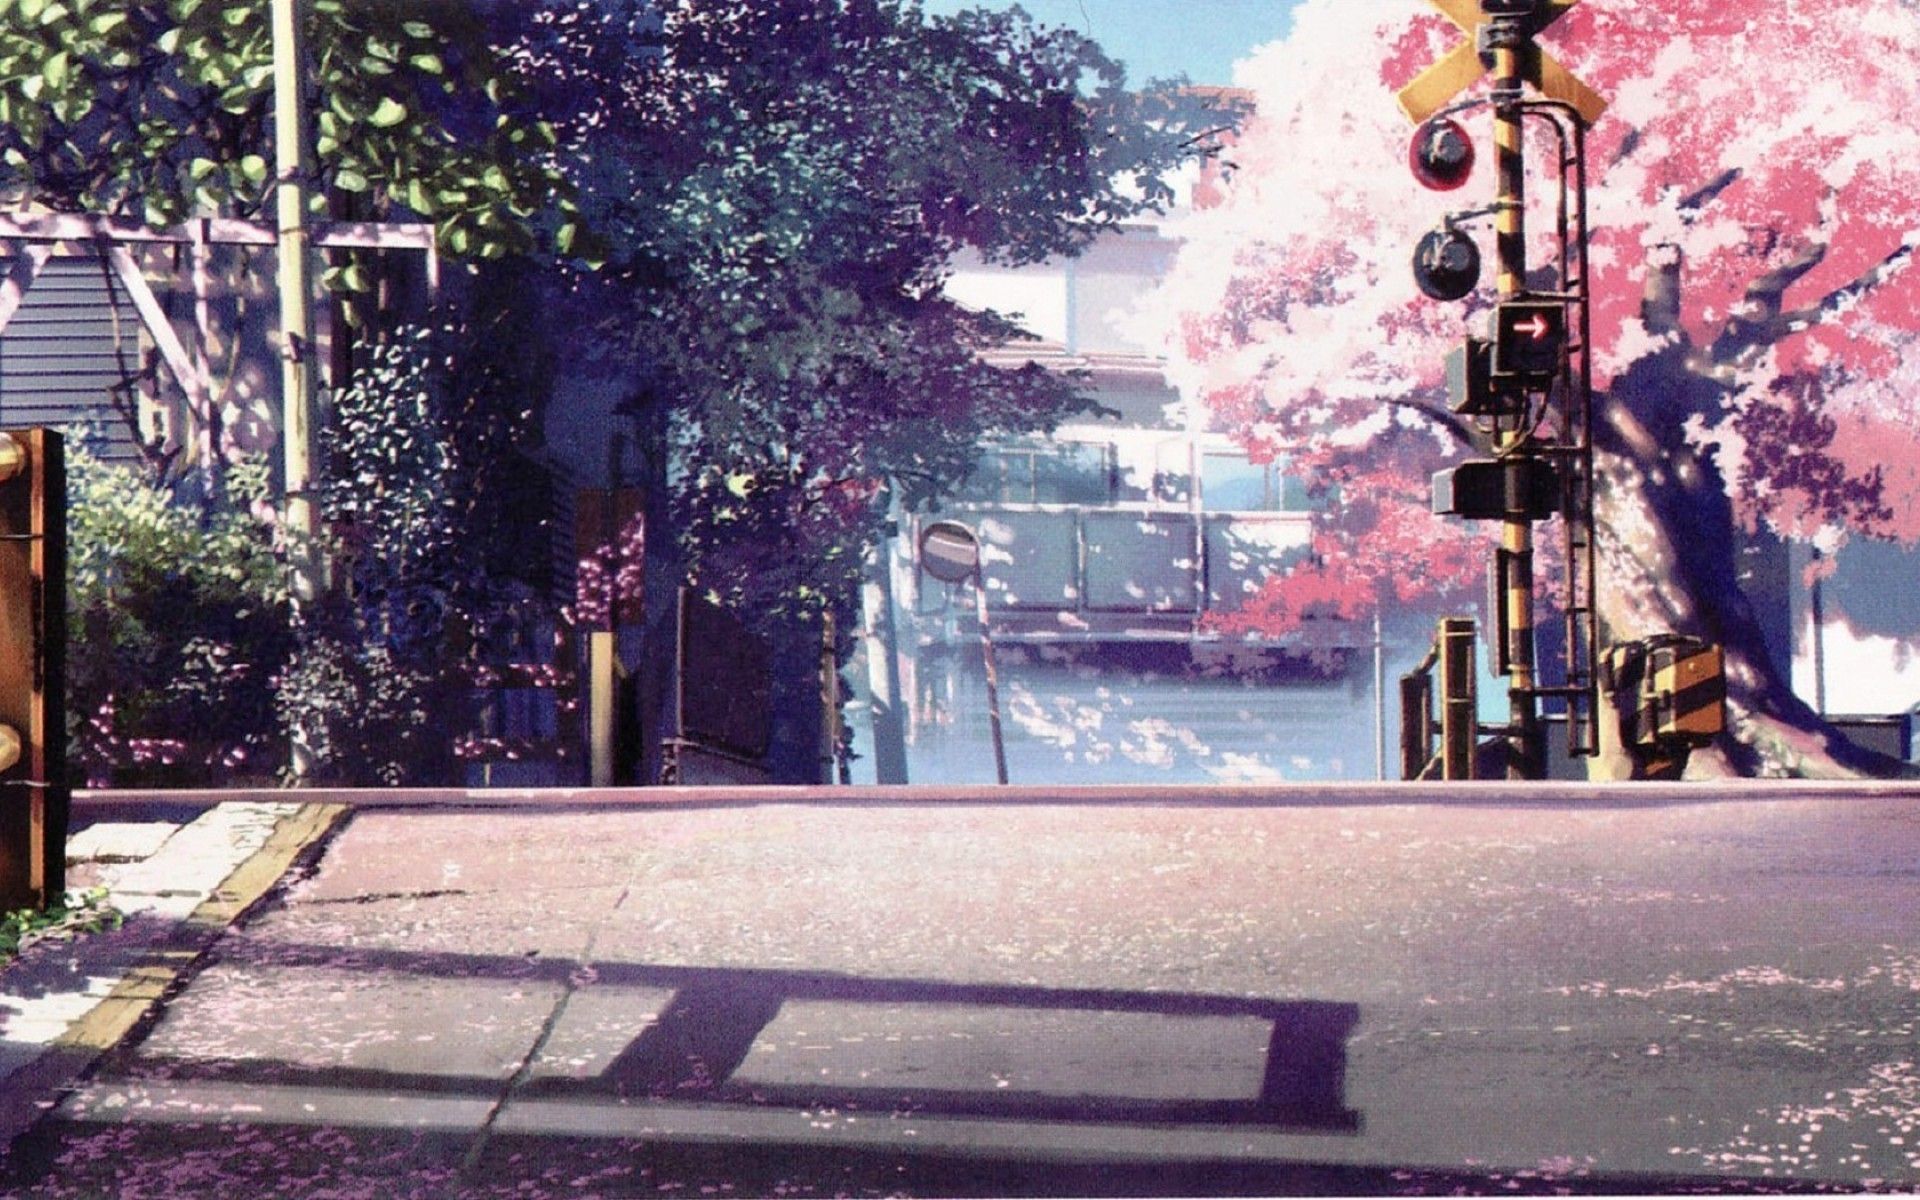 A 2d animated street with a pink tree and a train passing by - Anime landscape